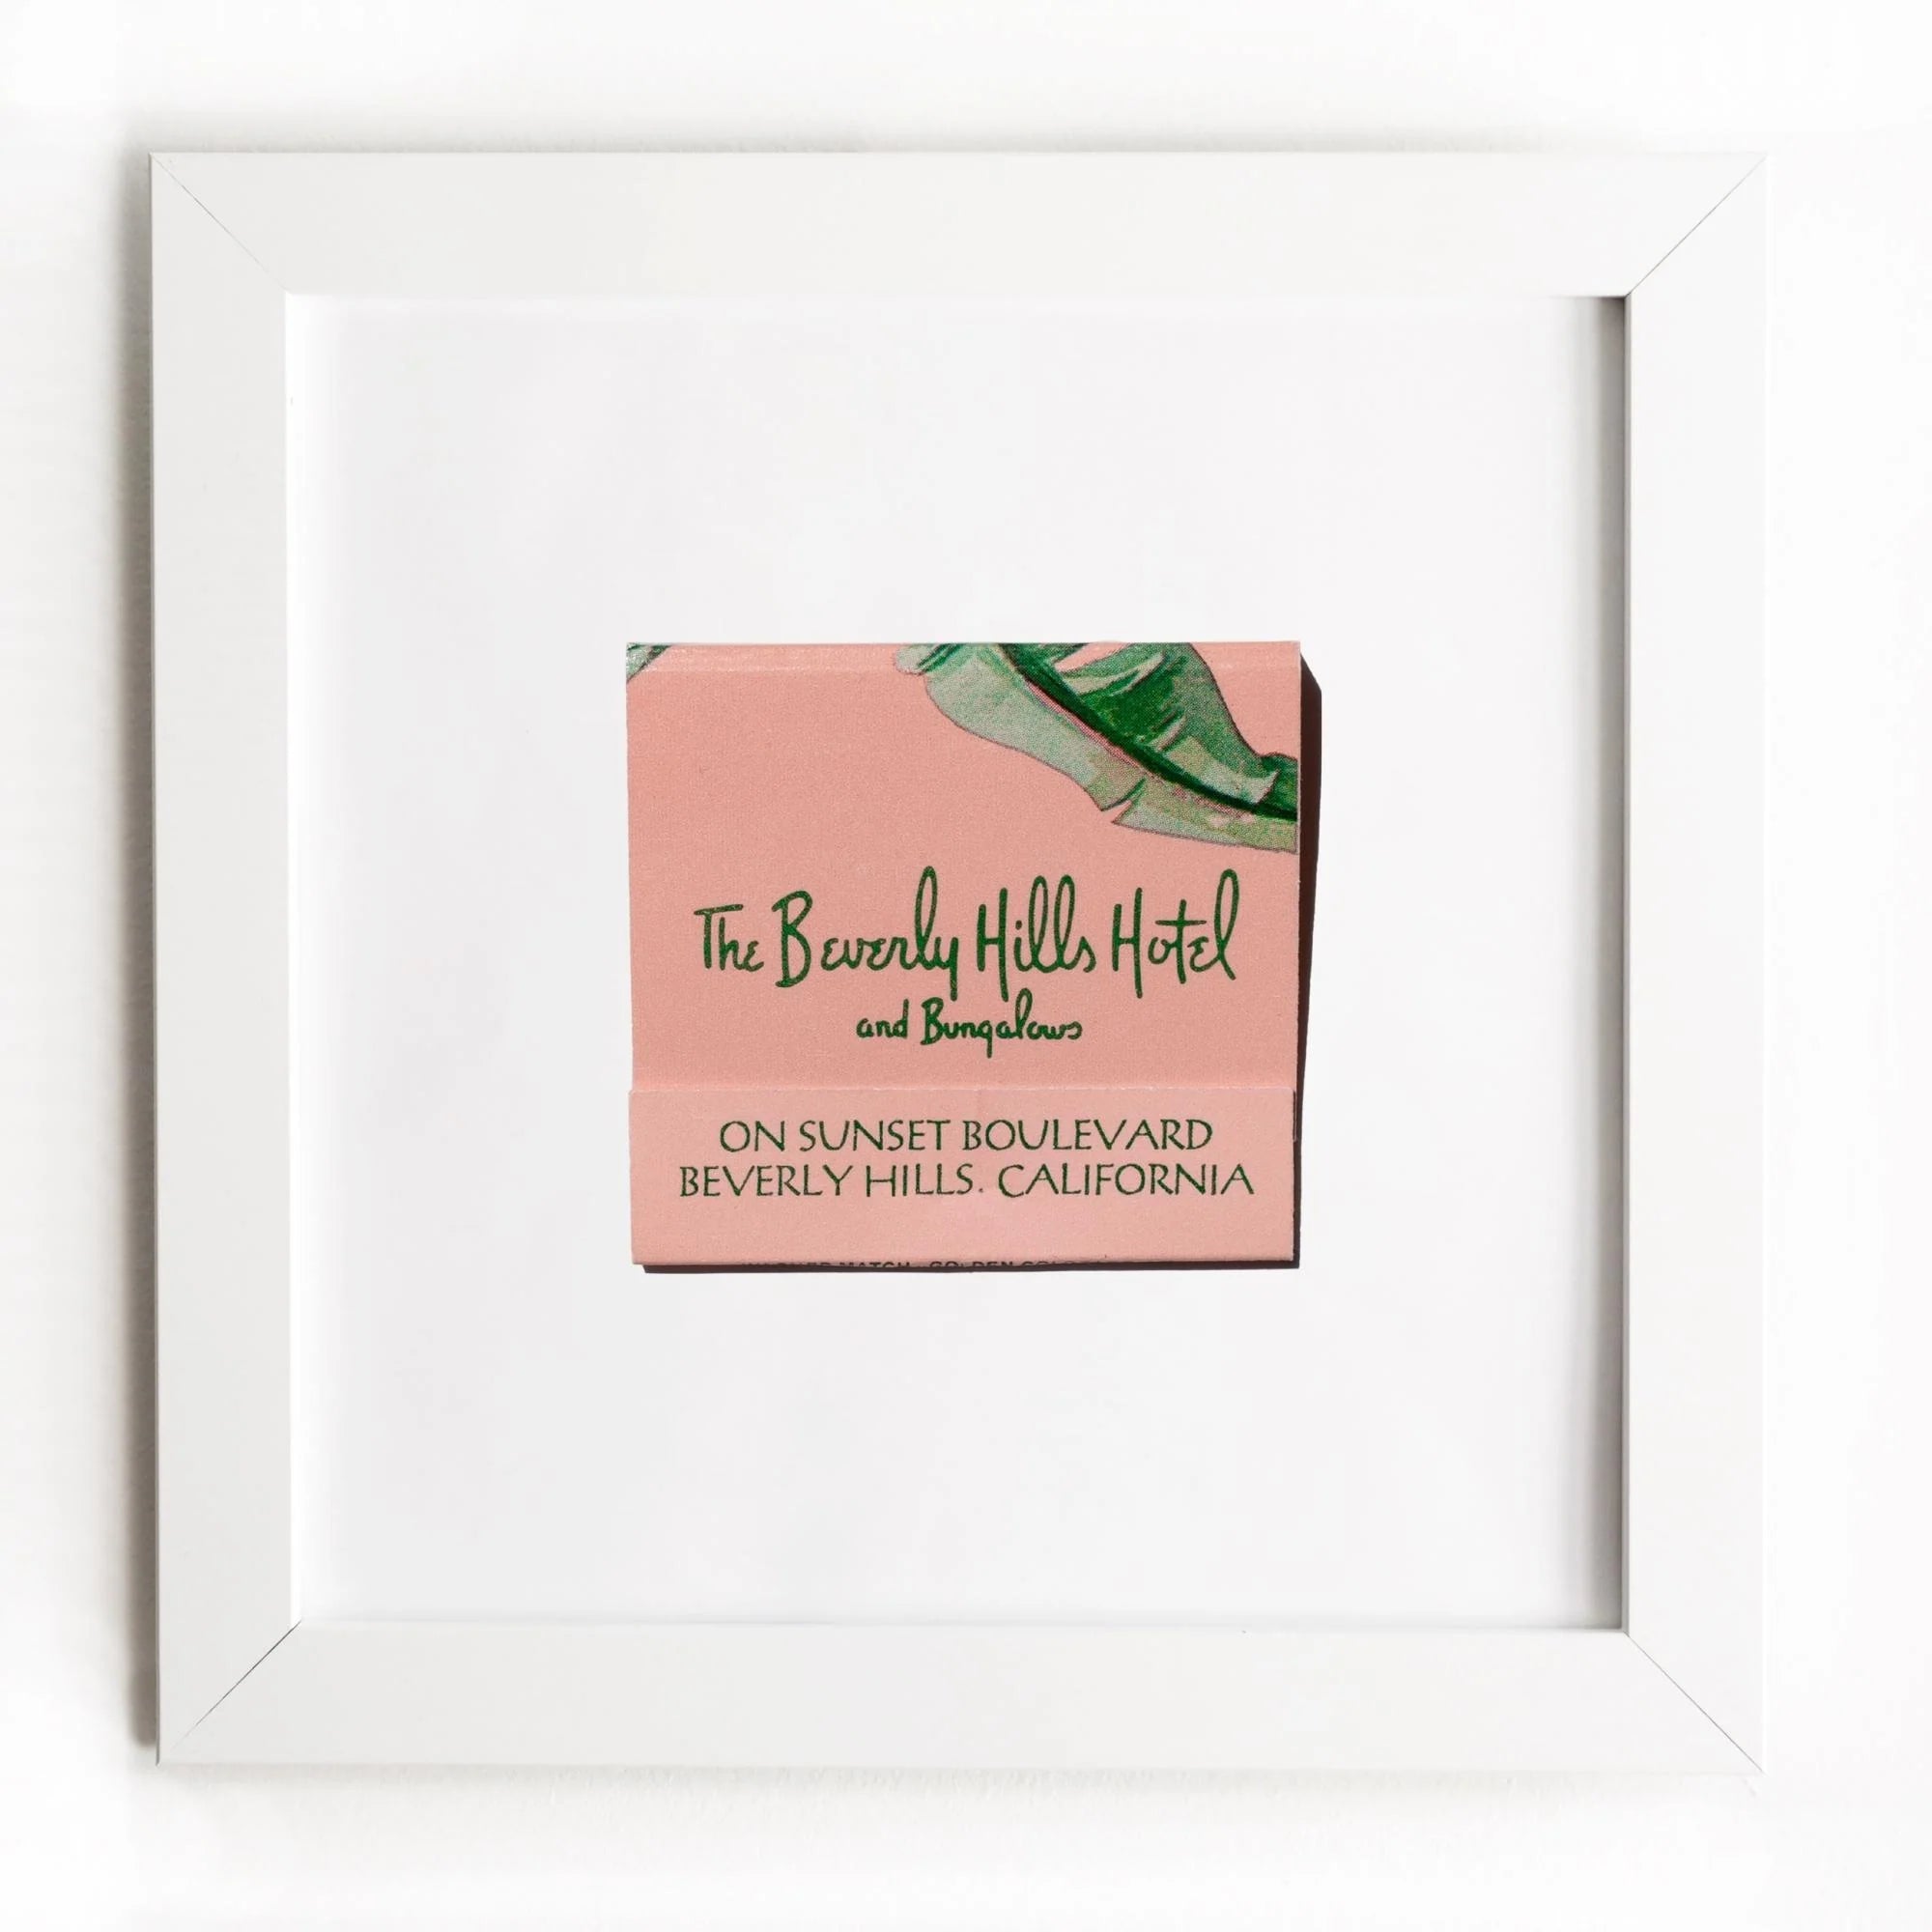 A framed artwork of a vintage hotel matchbook cover labeled &quot;The Beverly Hills Hotel and Bungalows&quot; in a Match South Art Square White Frame, featuring a pink background and green palm leaf design.